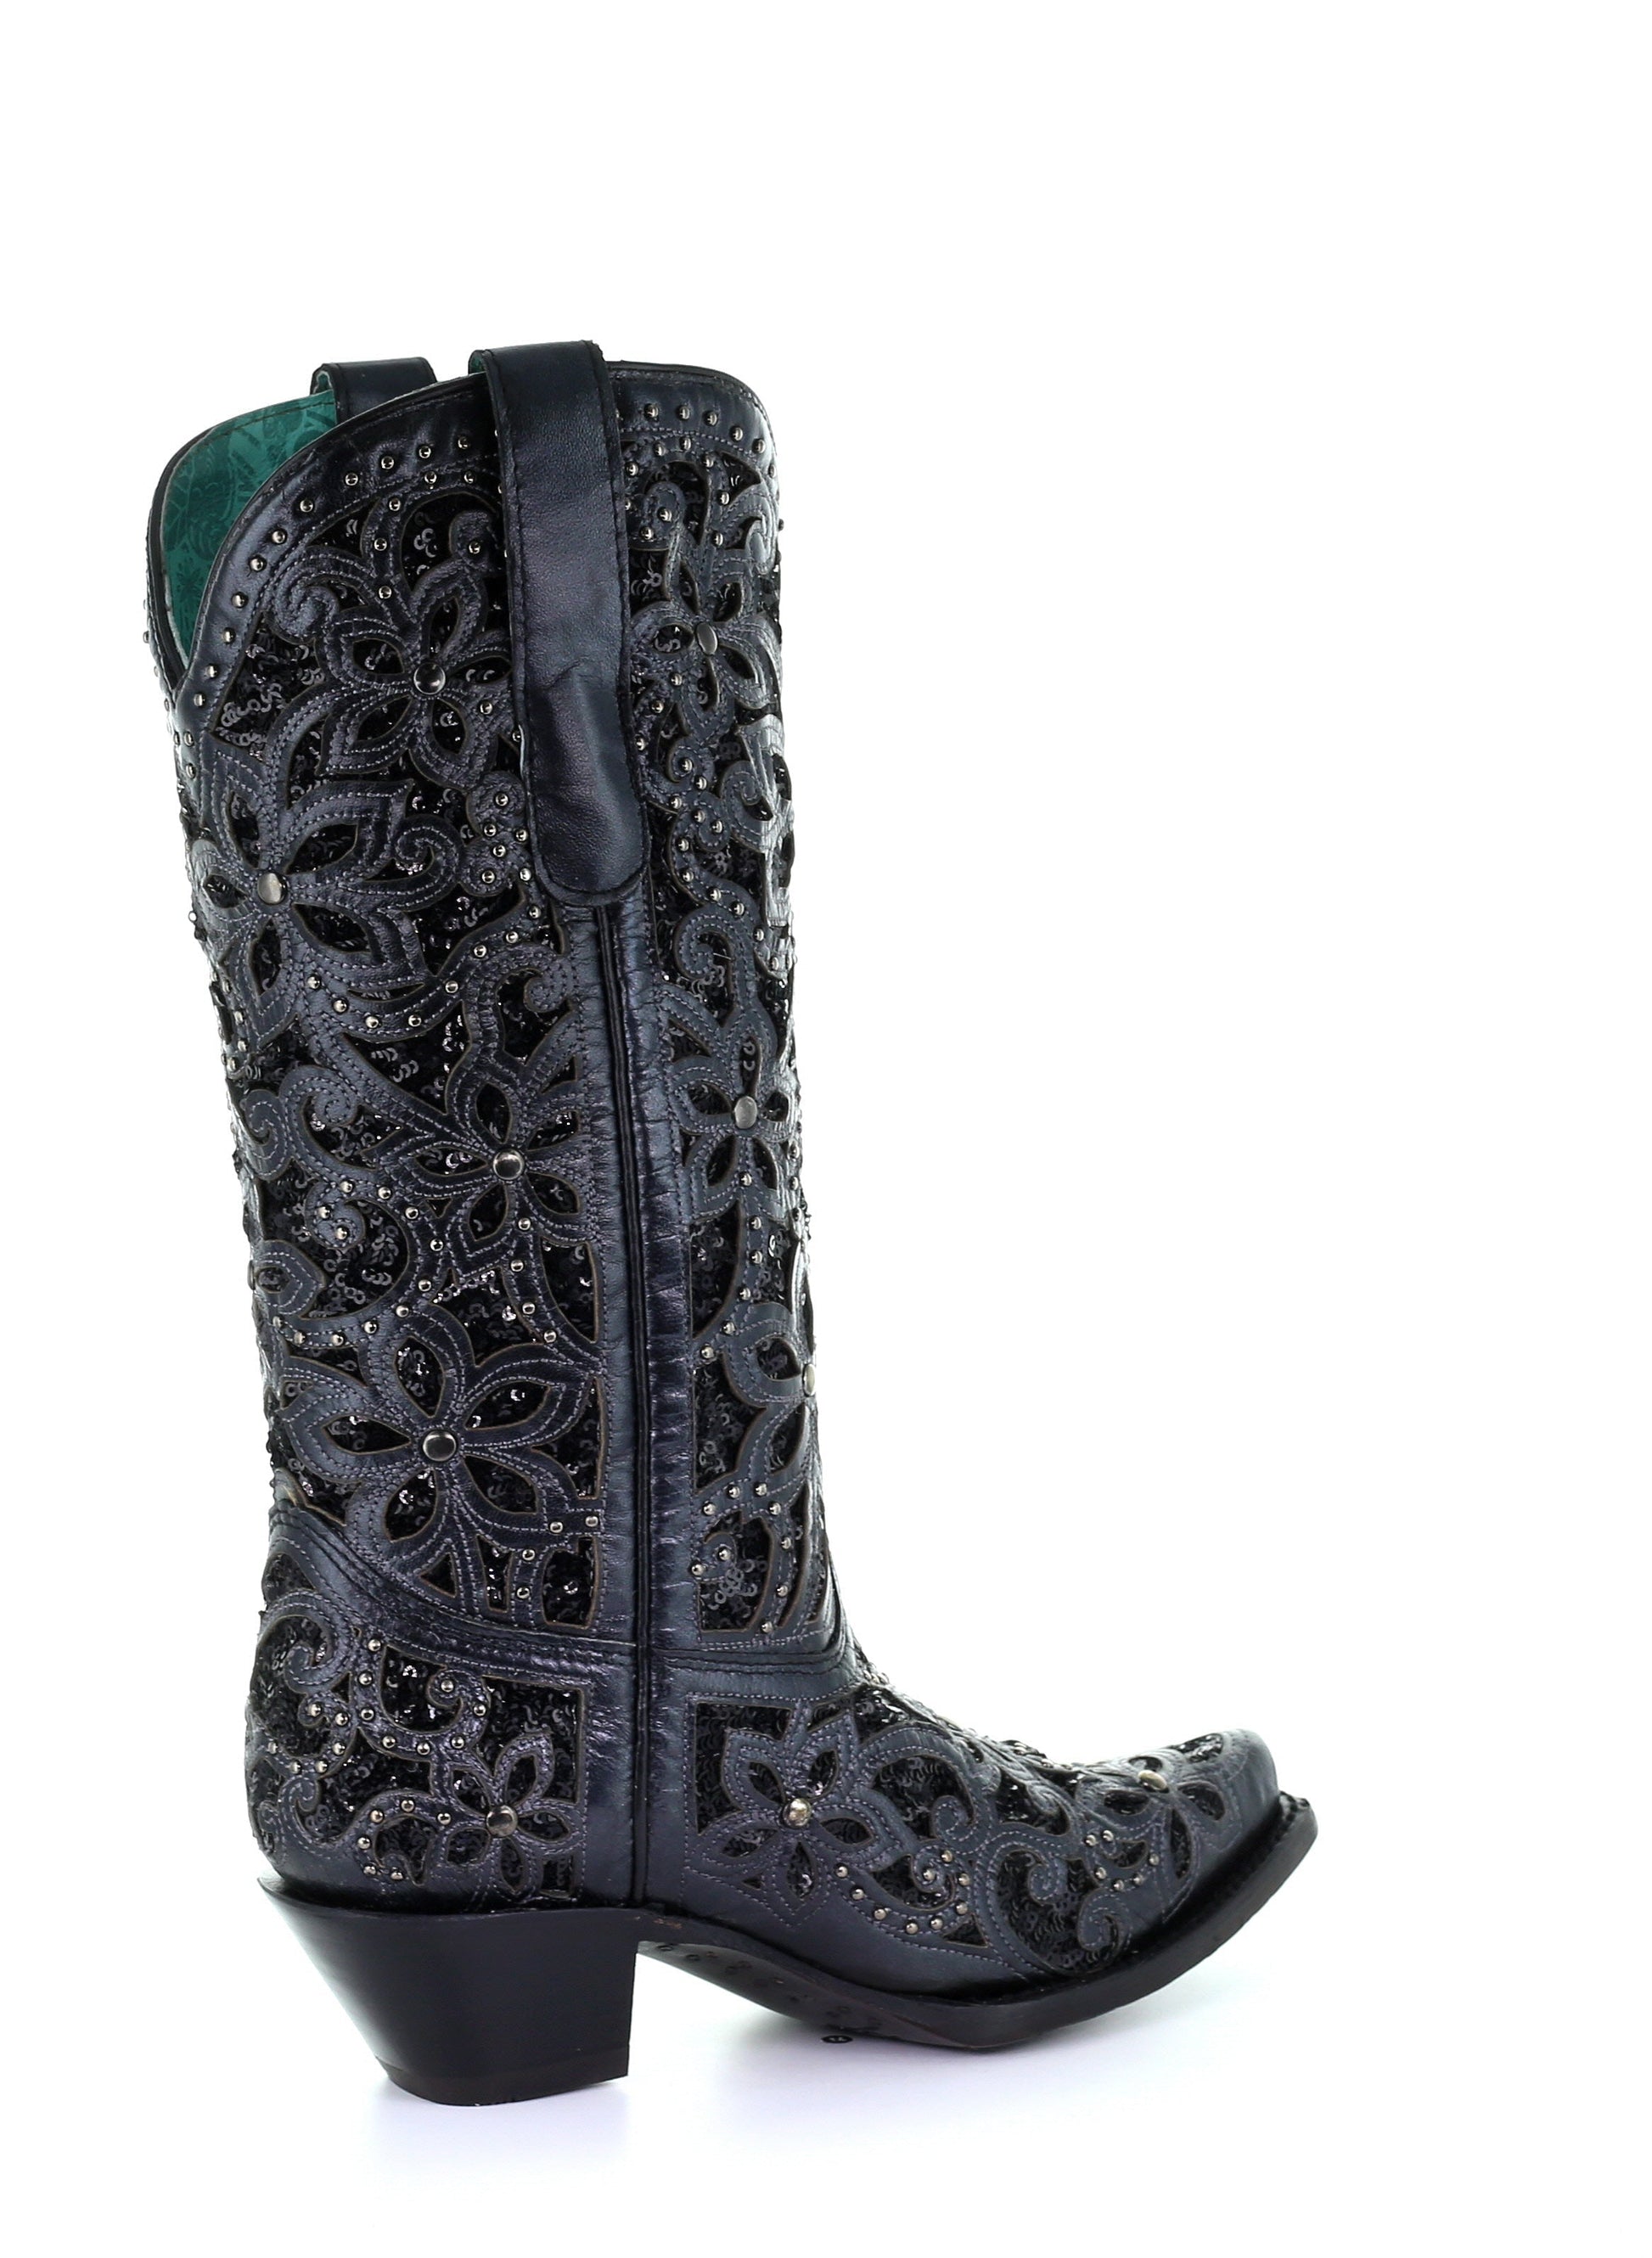 A3752-M BOOT CORRAL BLACK LD BLACK INLAY & EMBROIDERY & STUDS-Kuet